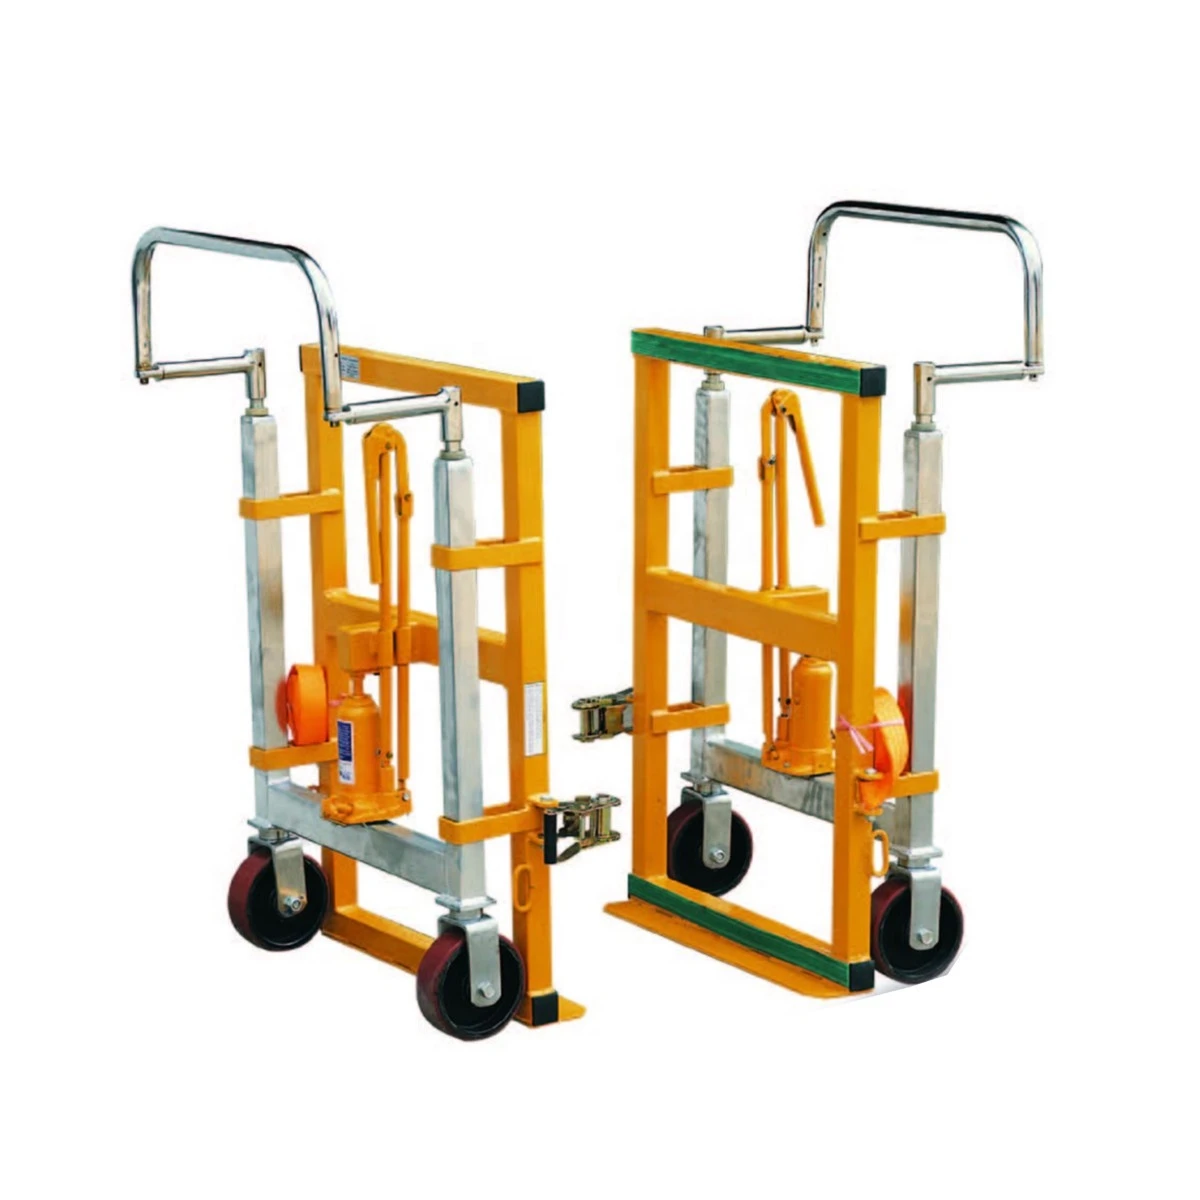 Hydraulic Manual Furniture lifter Mover